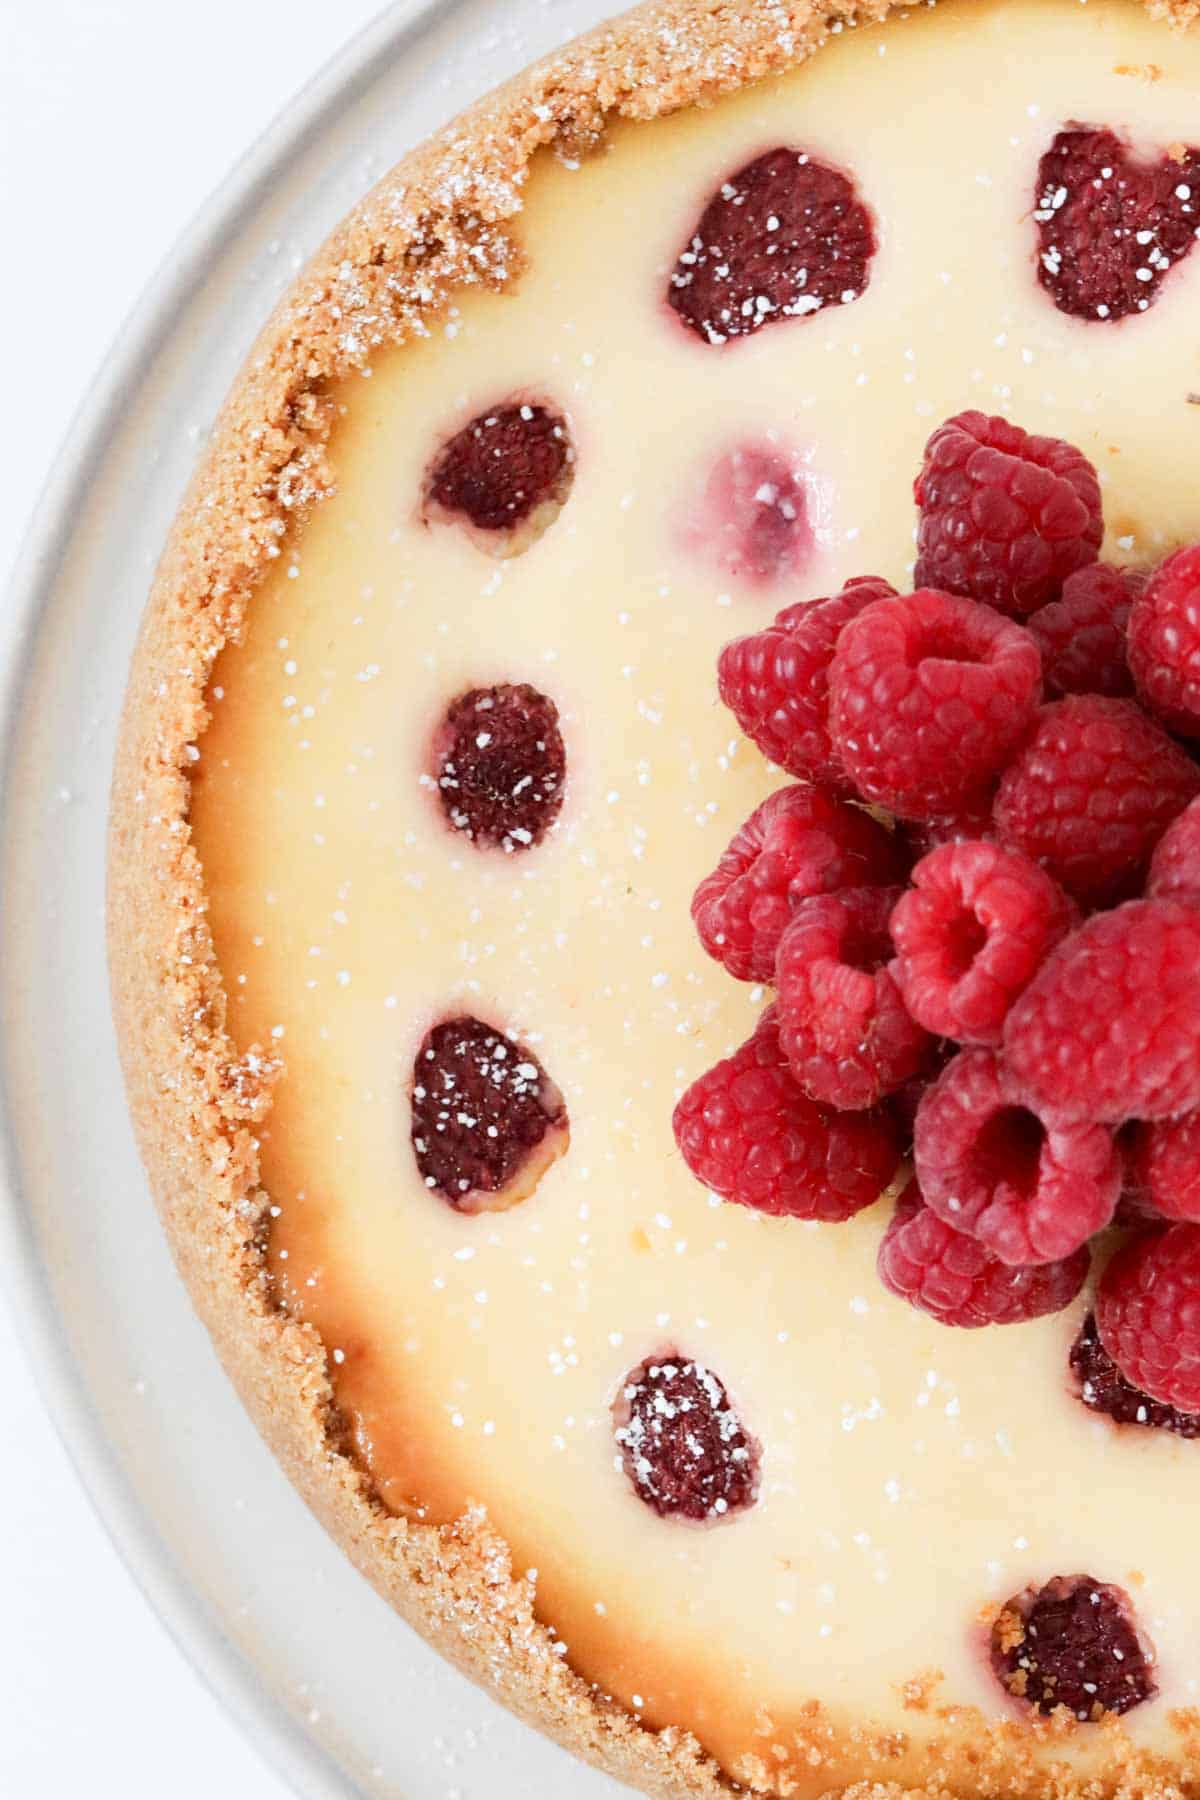 Overhead shot of baked cheesecake with a pile of fresh raspberries on top.